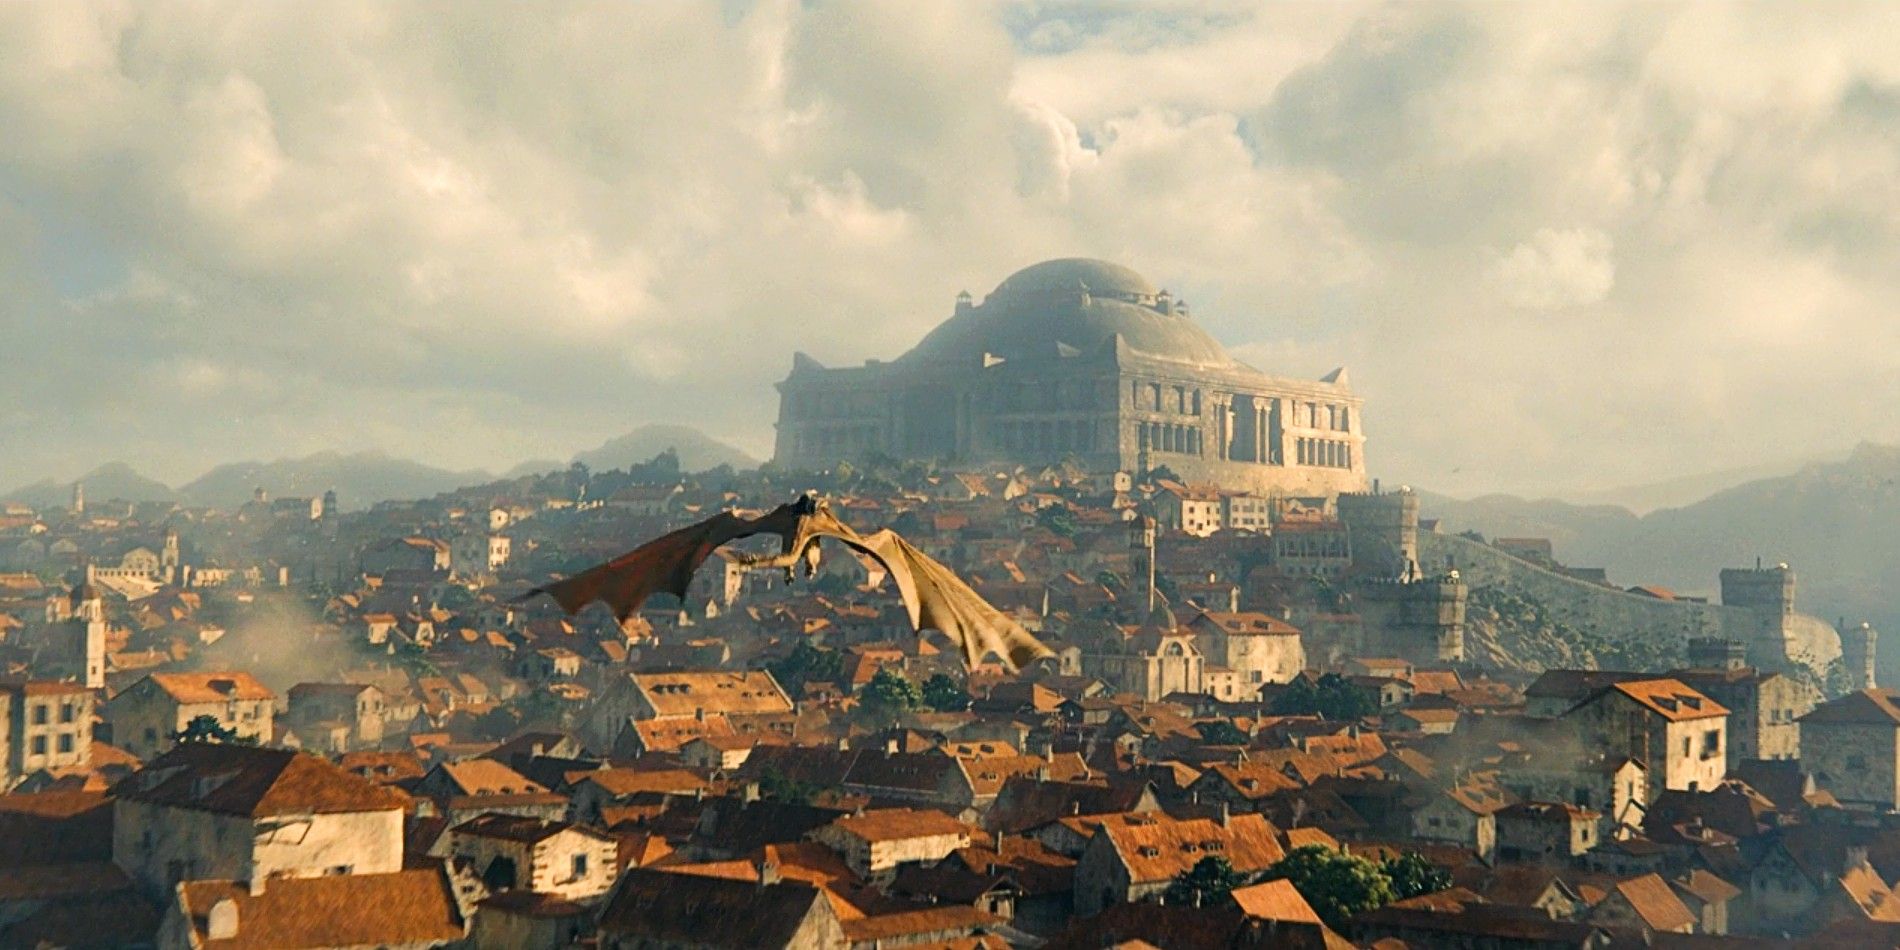 milly-alcock-as-young-rhaenyra-targaryen-on-the-back-of-syrax-in-house-of-the-dragon-with-a-backdrop-of-kings-landing.jpg